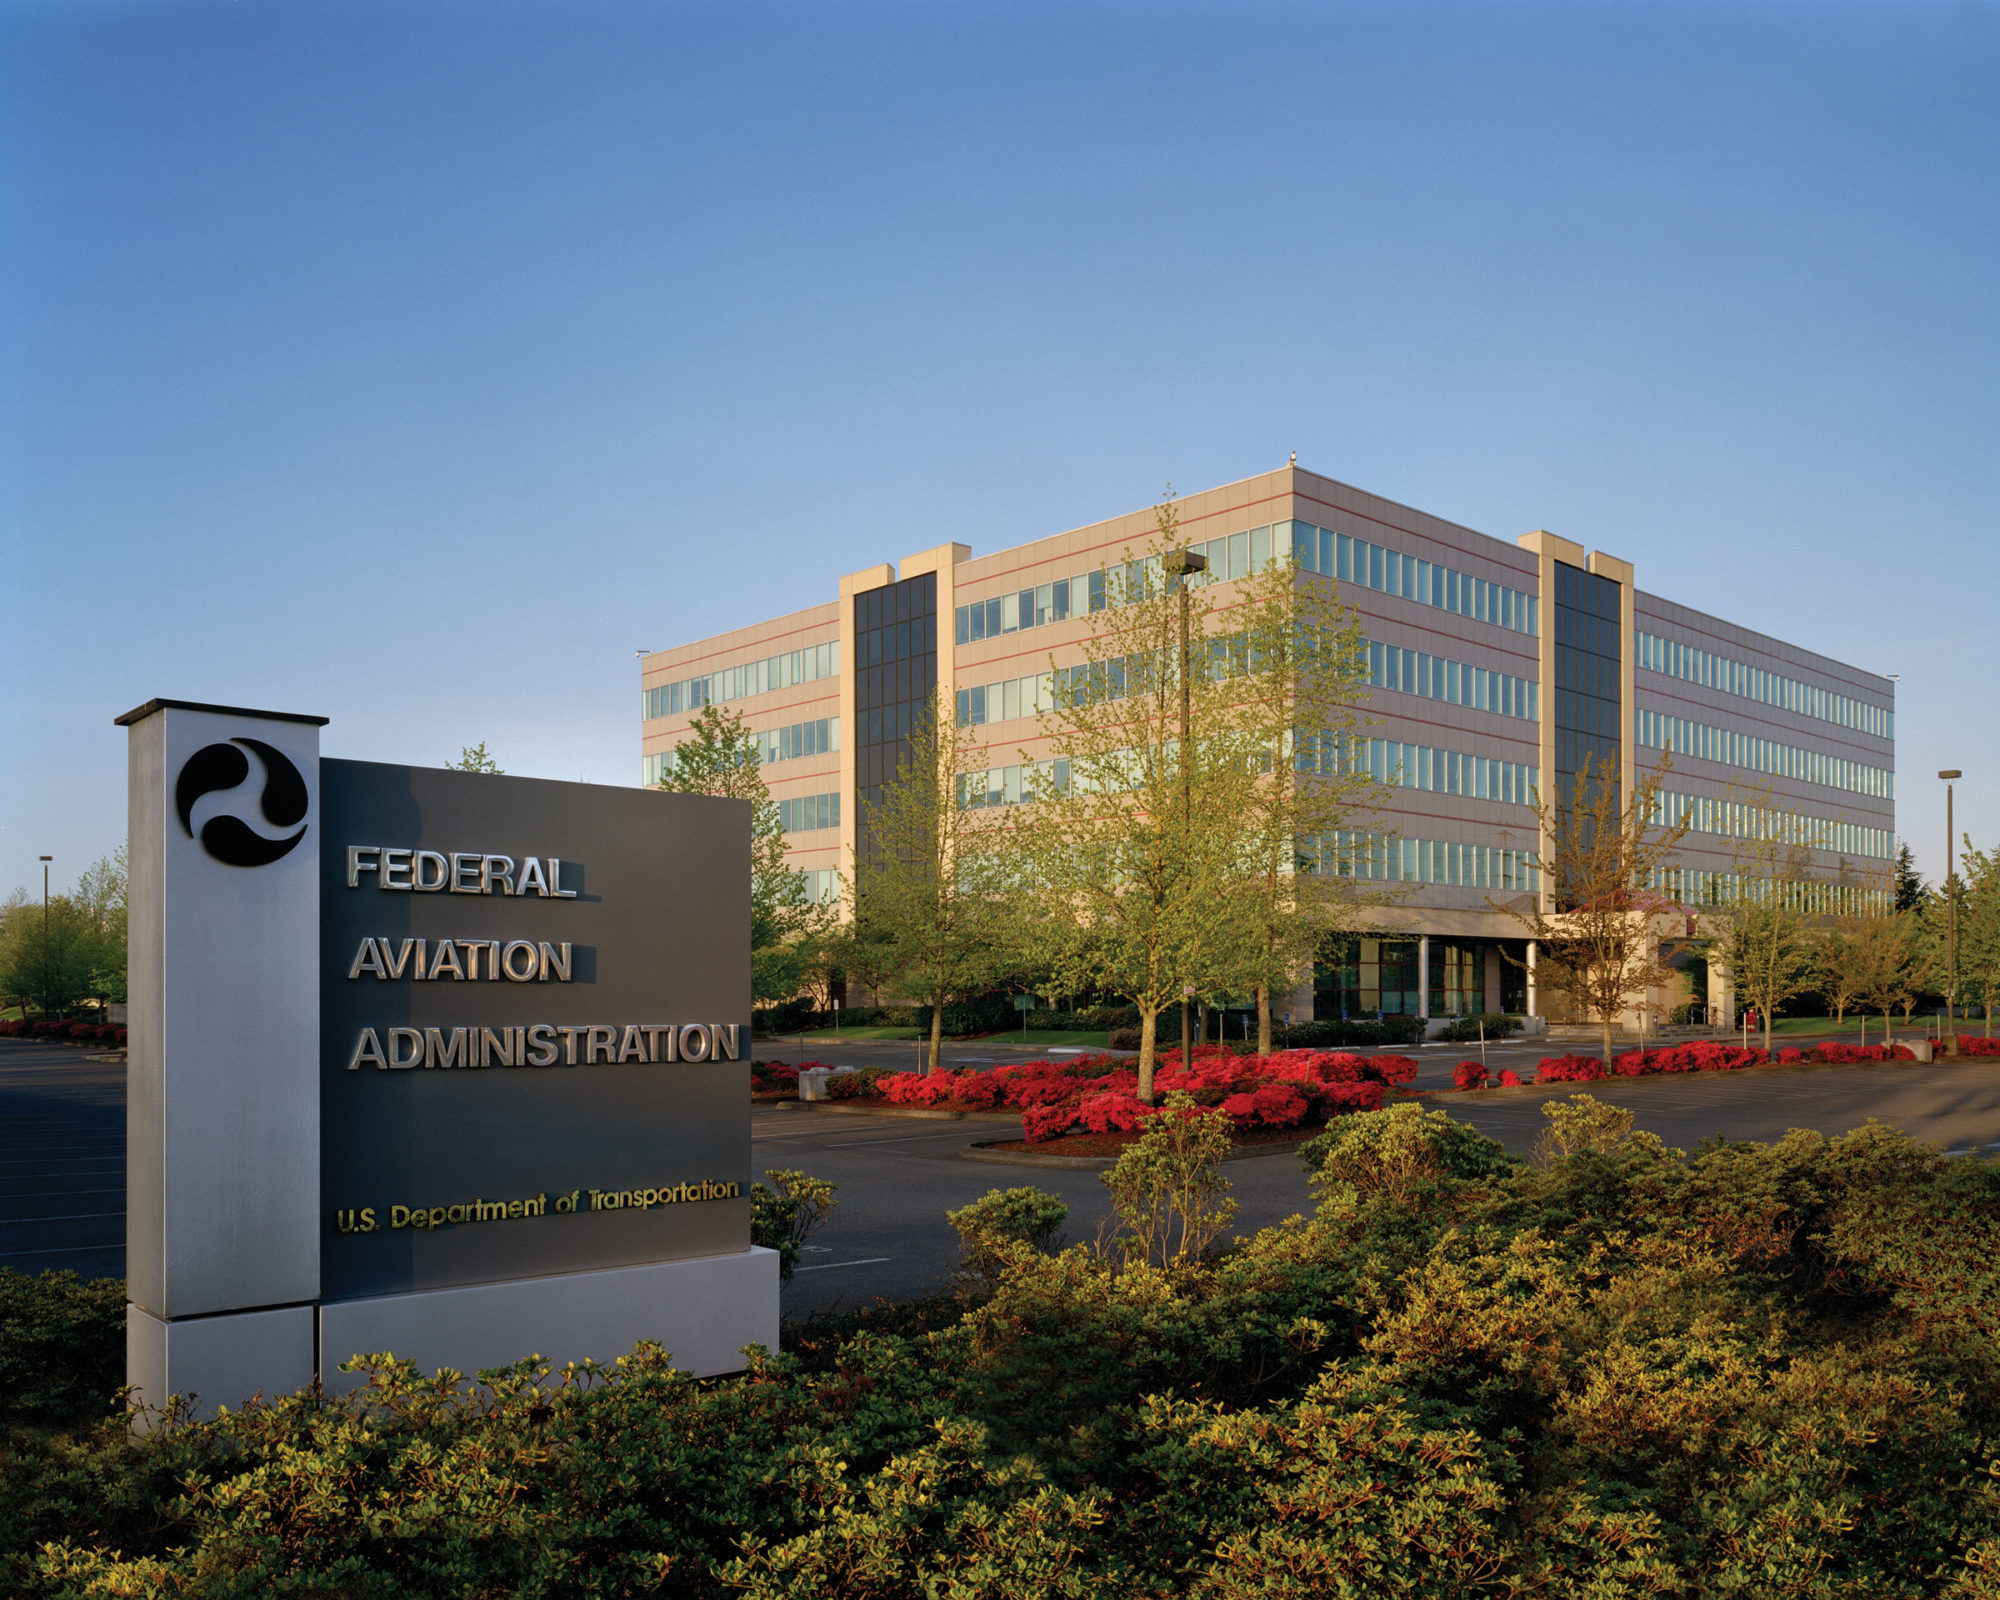 Exterior shot of the FAA Building and signage, managed by Unico, a private equity firm, fully leased to the Federal Aviation Administration